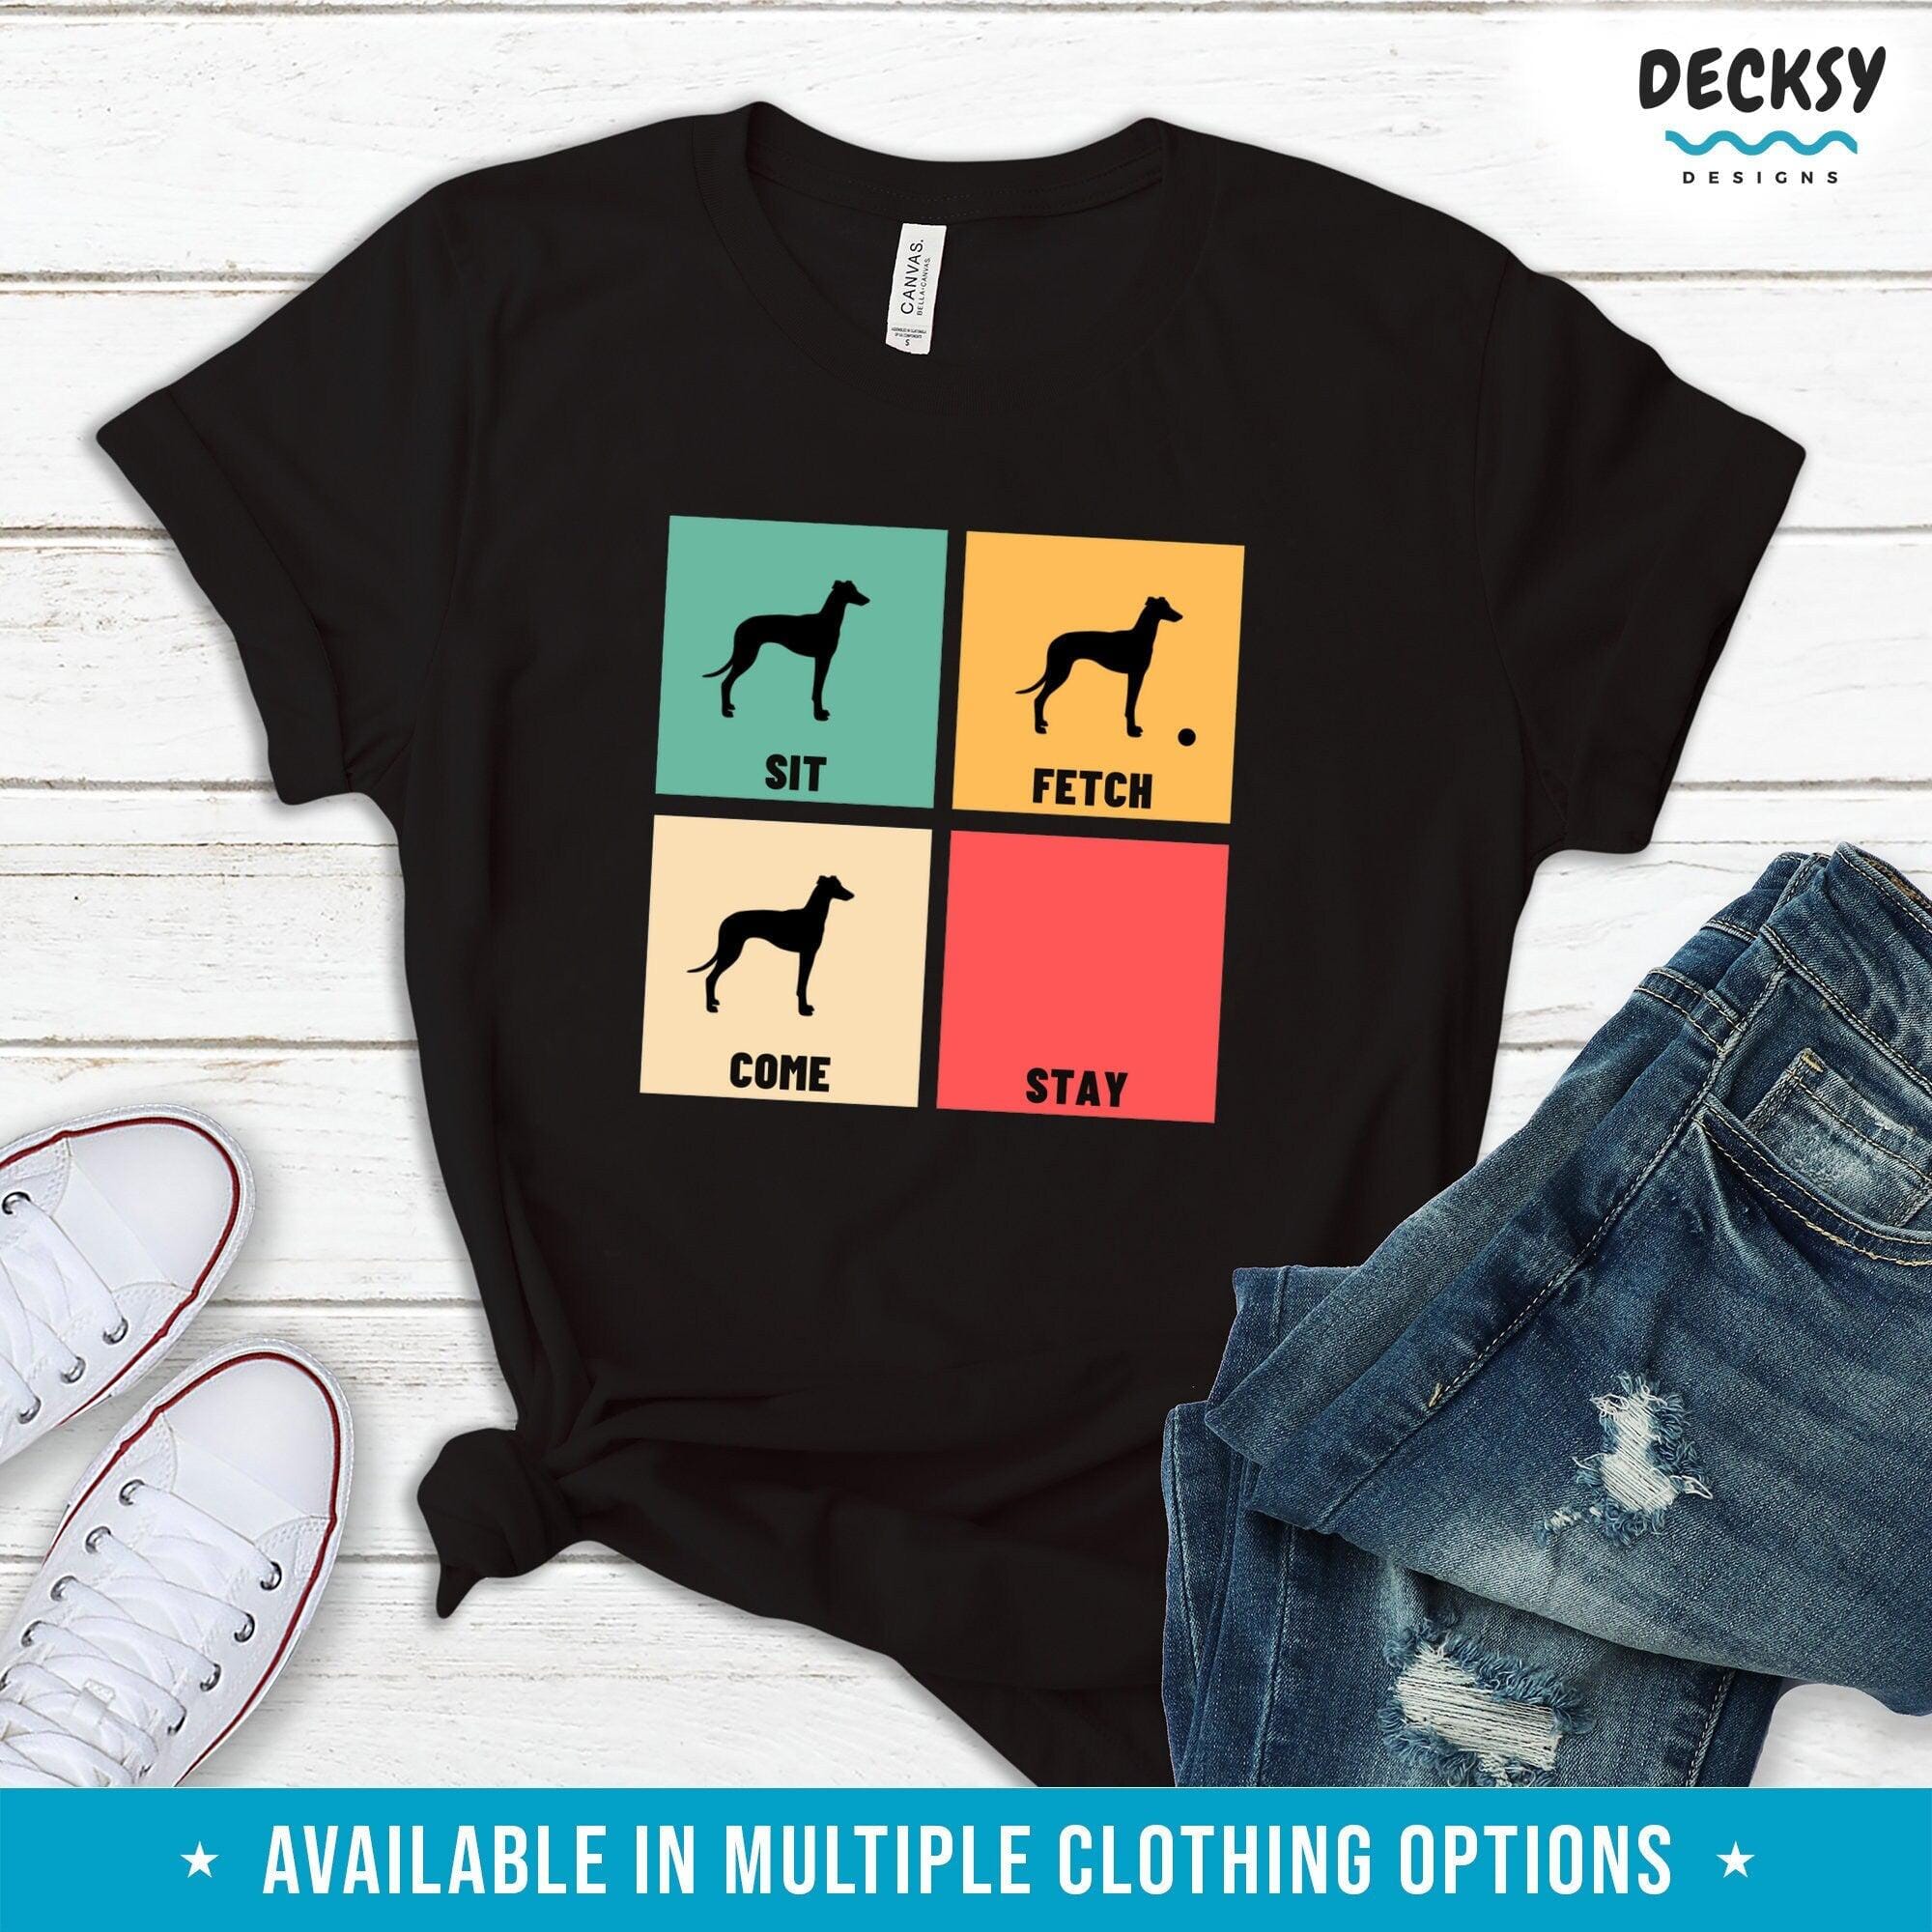 Greyhound Shirt, Funny Dog Owner Gift-Clothing:Gender-Neutral Adult Clothing:Tops & Tees:T-shirts:Graphic Tees-DecksyDesigns